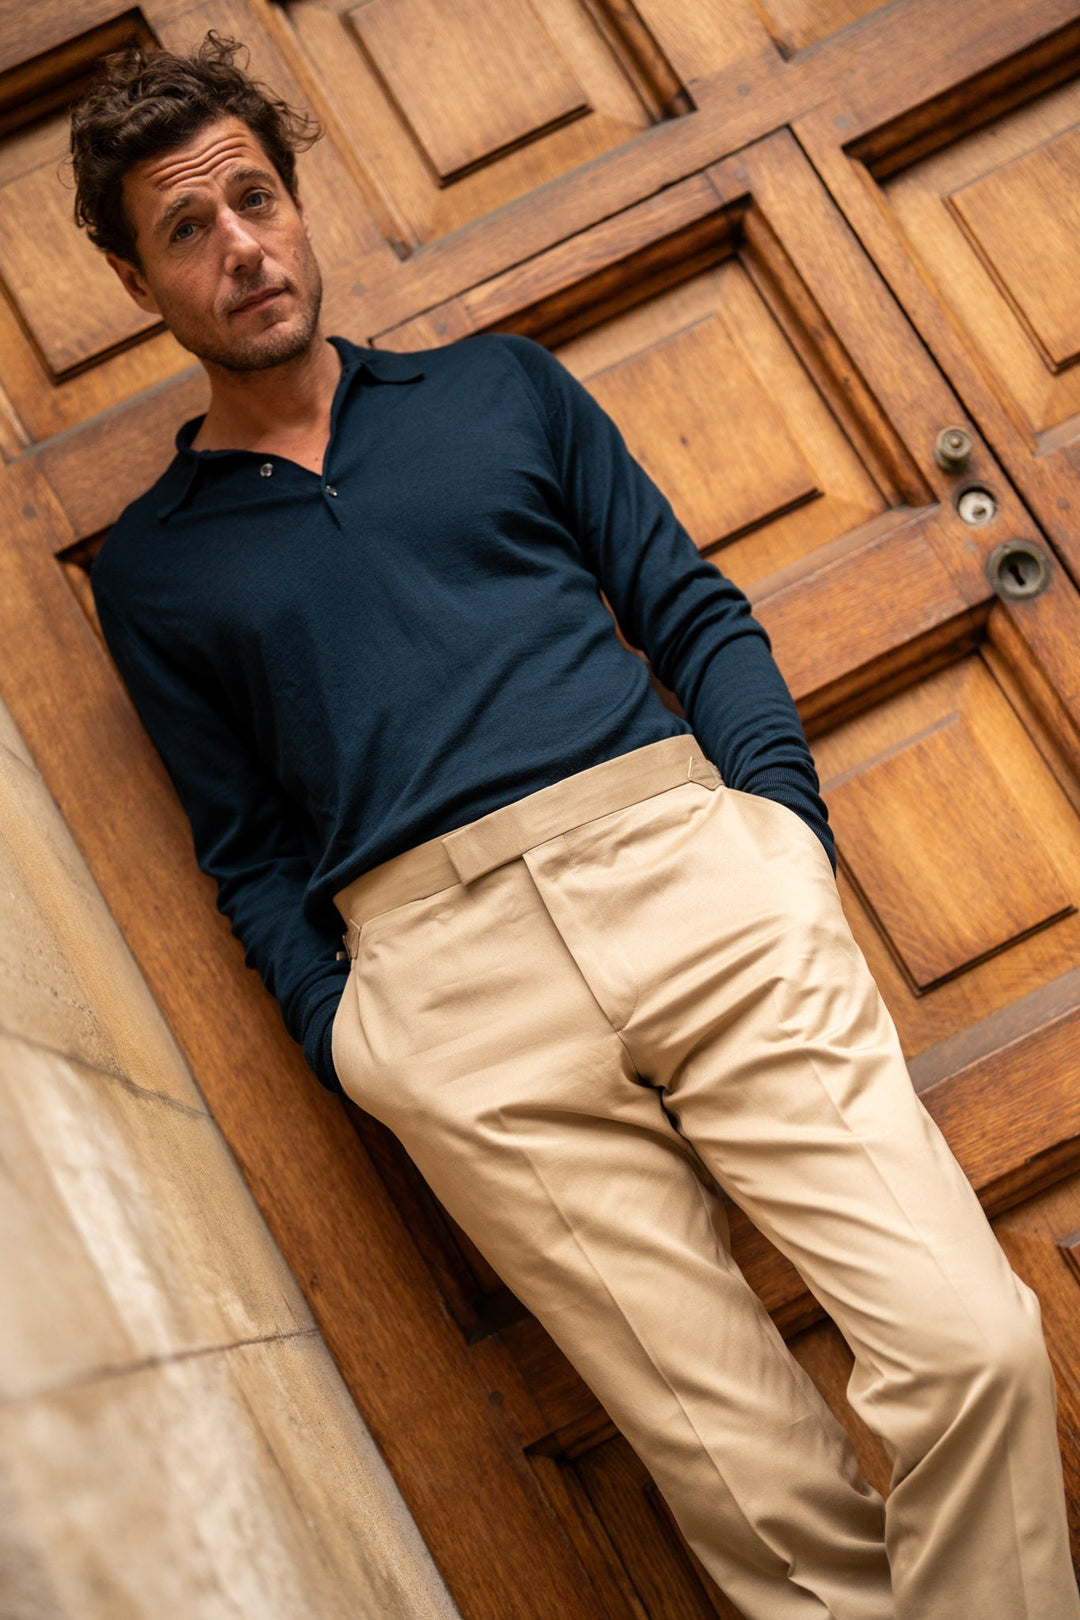 New Caine Beige Cotton Trousers-New Caine-Kit Blake